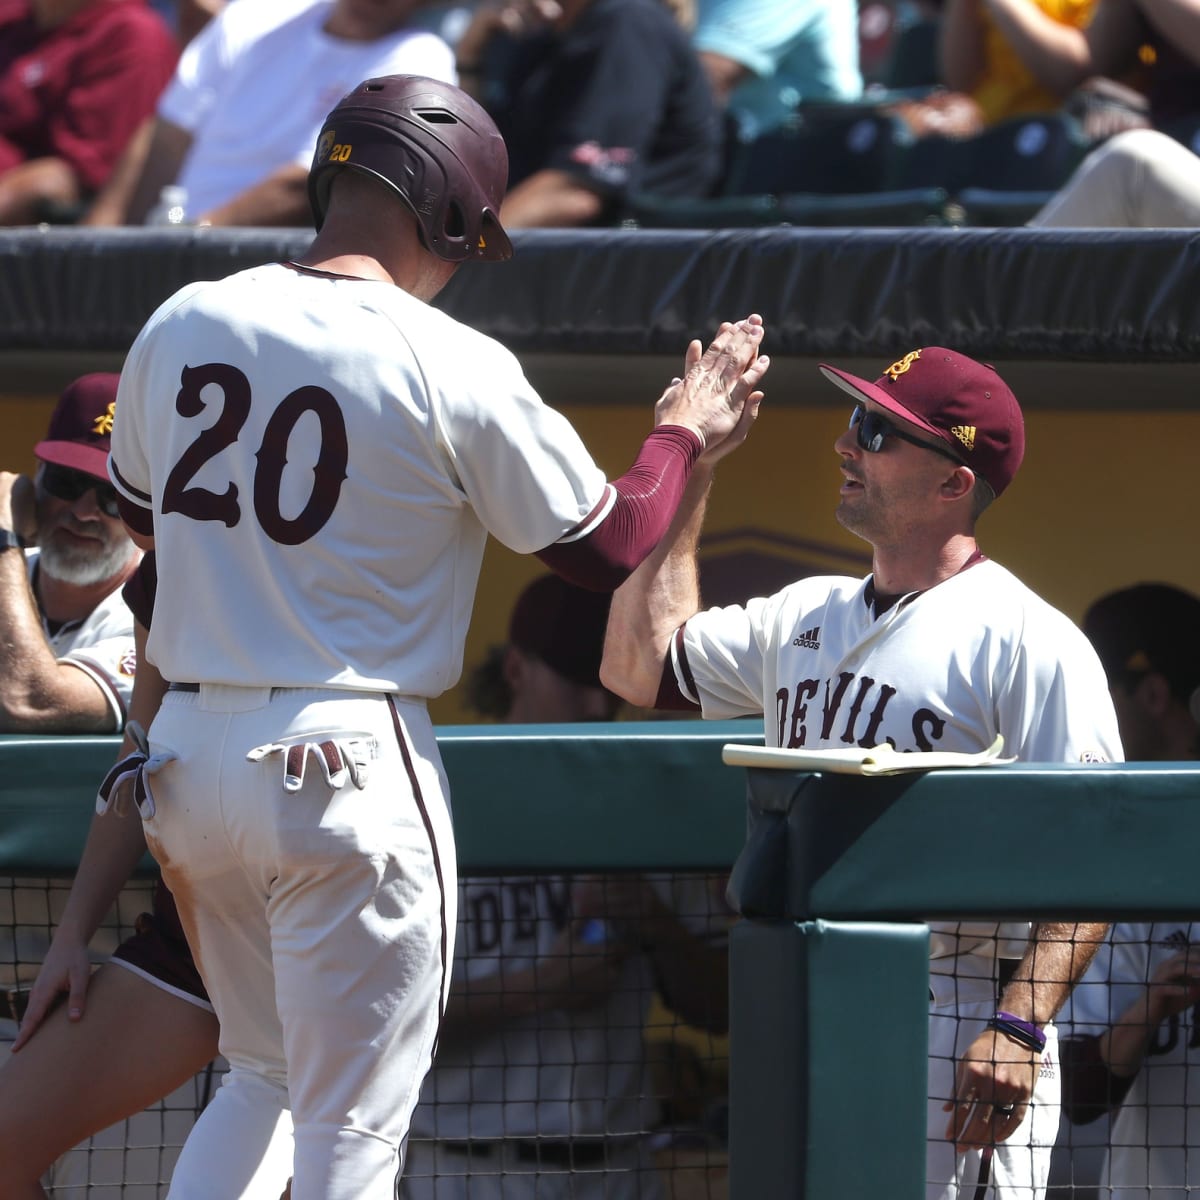 ASU baseball alum Spencer Torkelson learning as Detroit Tigers rookie